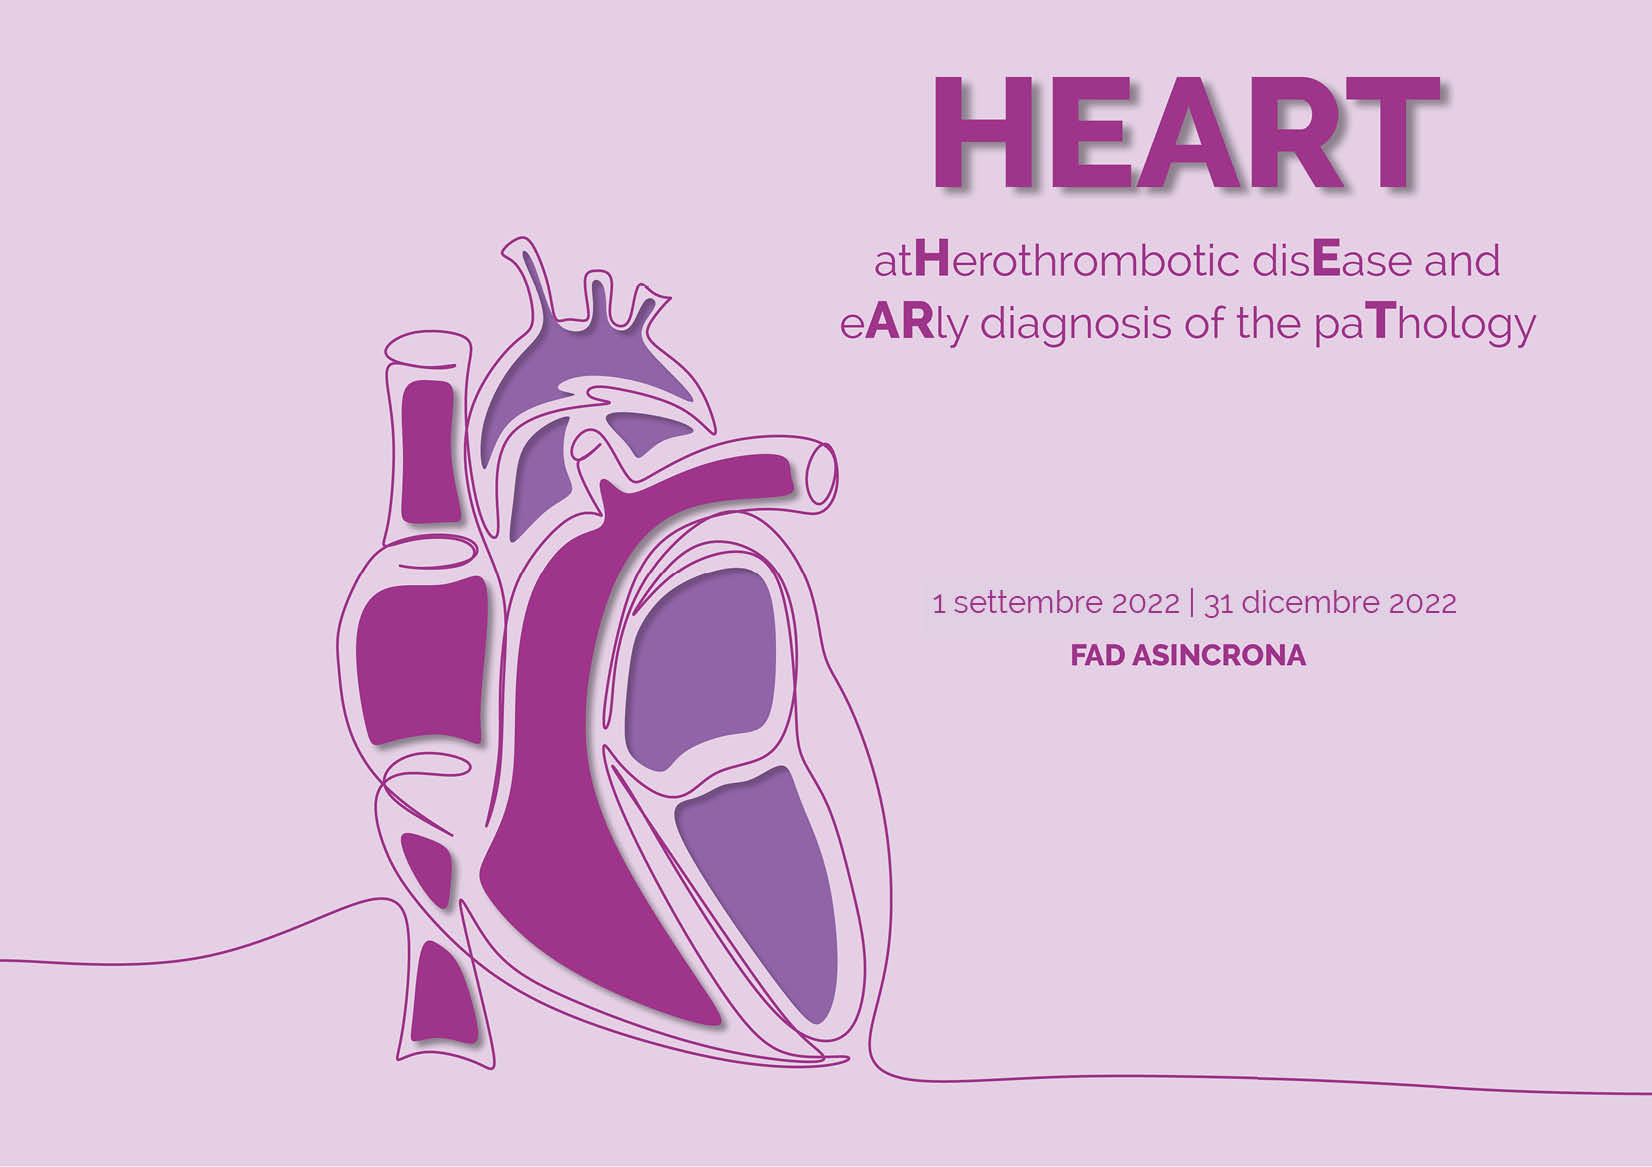 HEART – atHerothrombotic disEase and eARly diagnosis of the paThology 2022